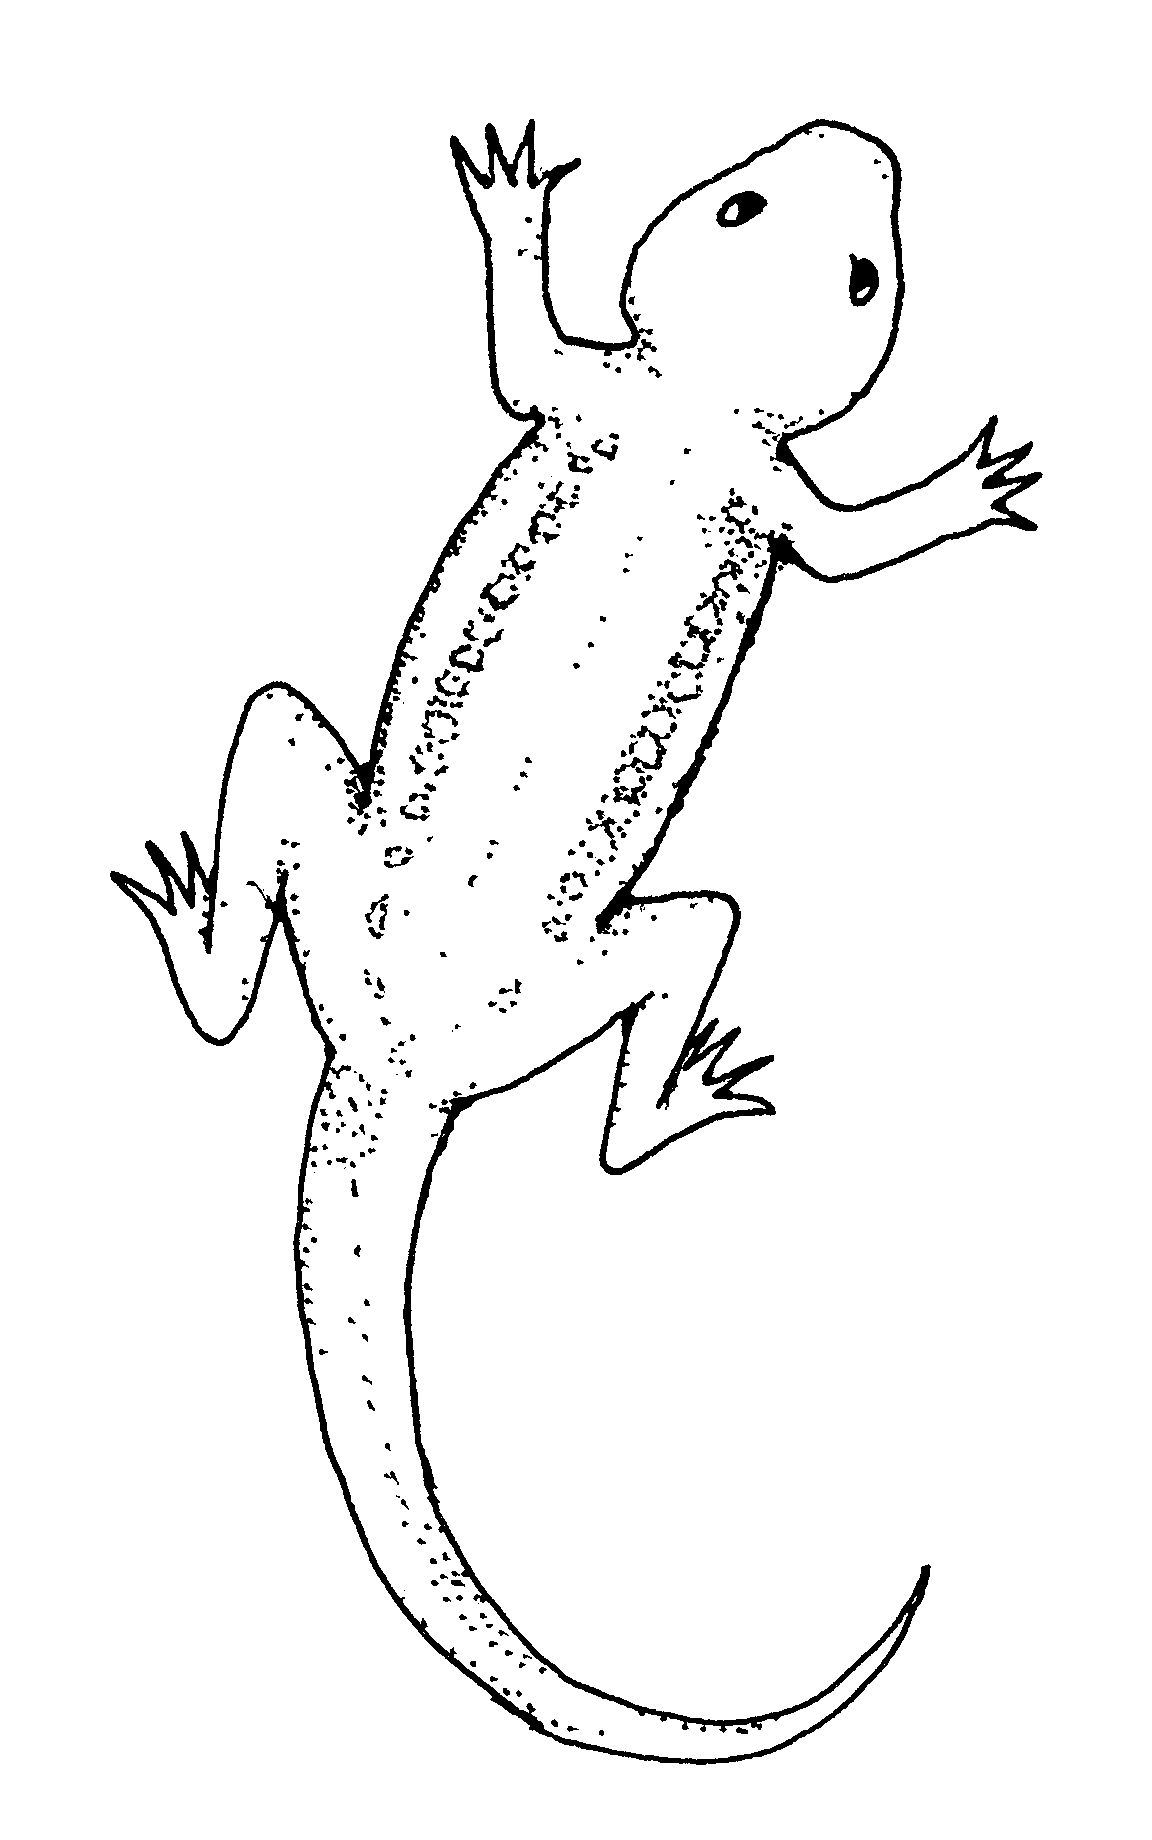 Black and white lizard clipart